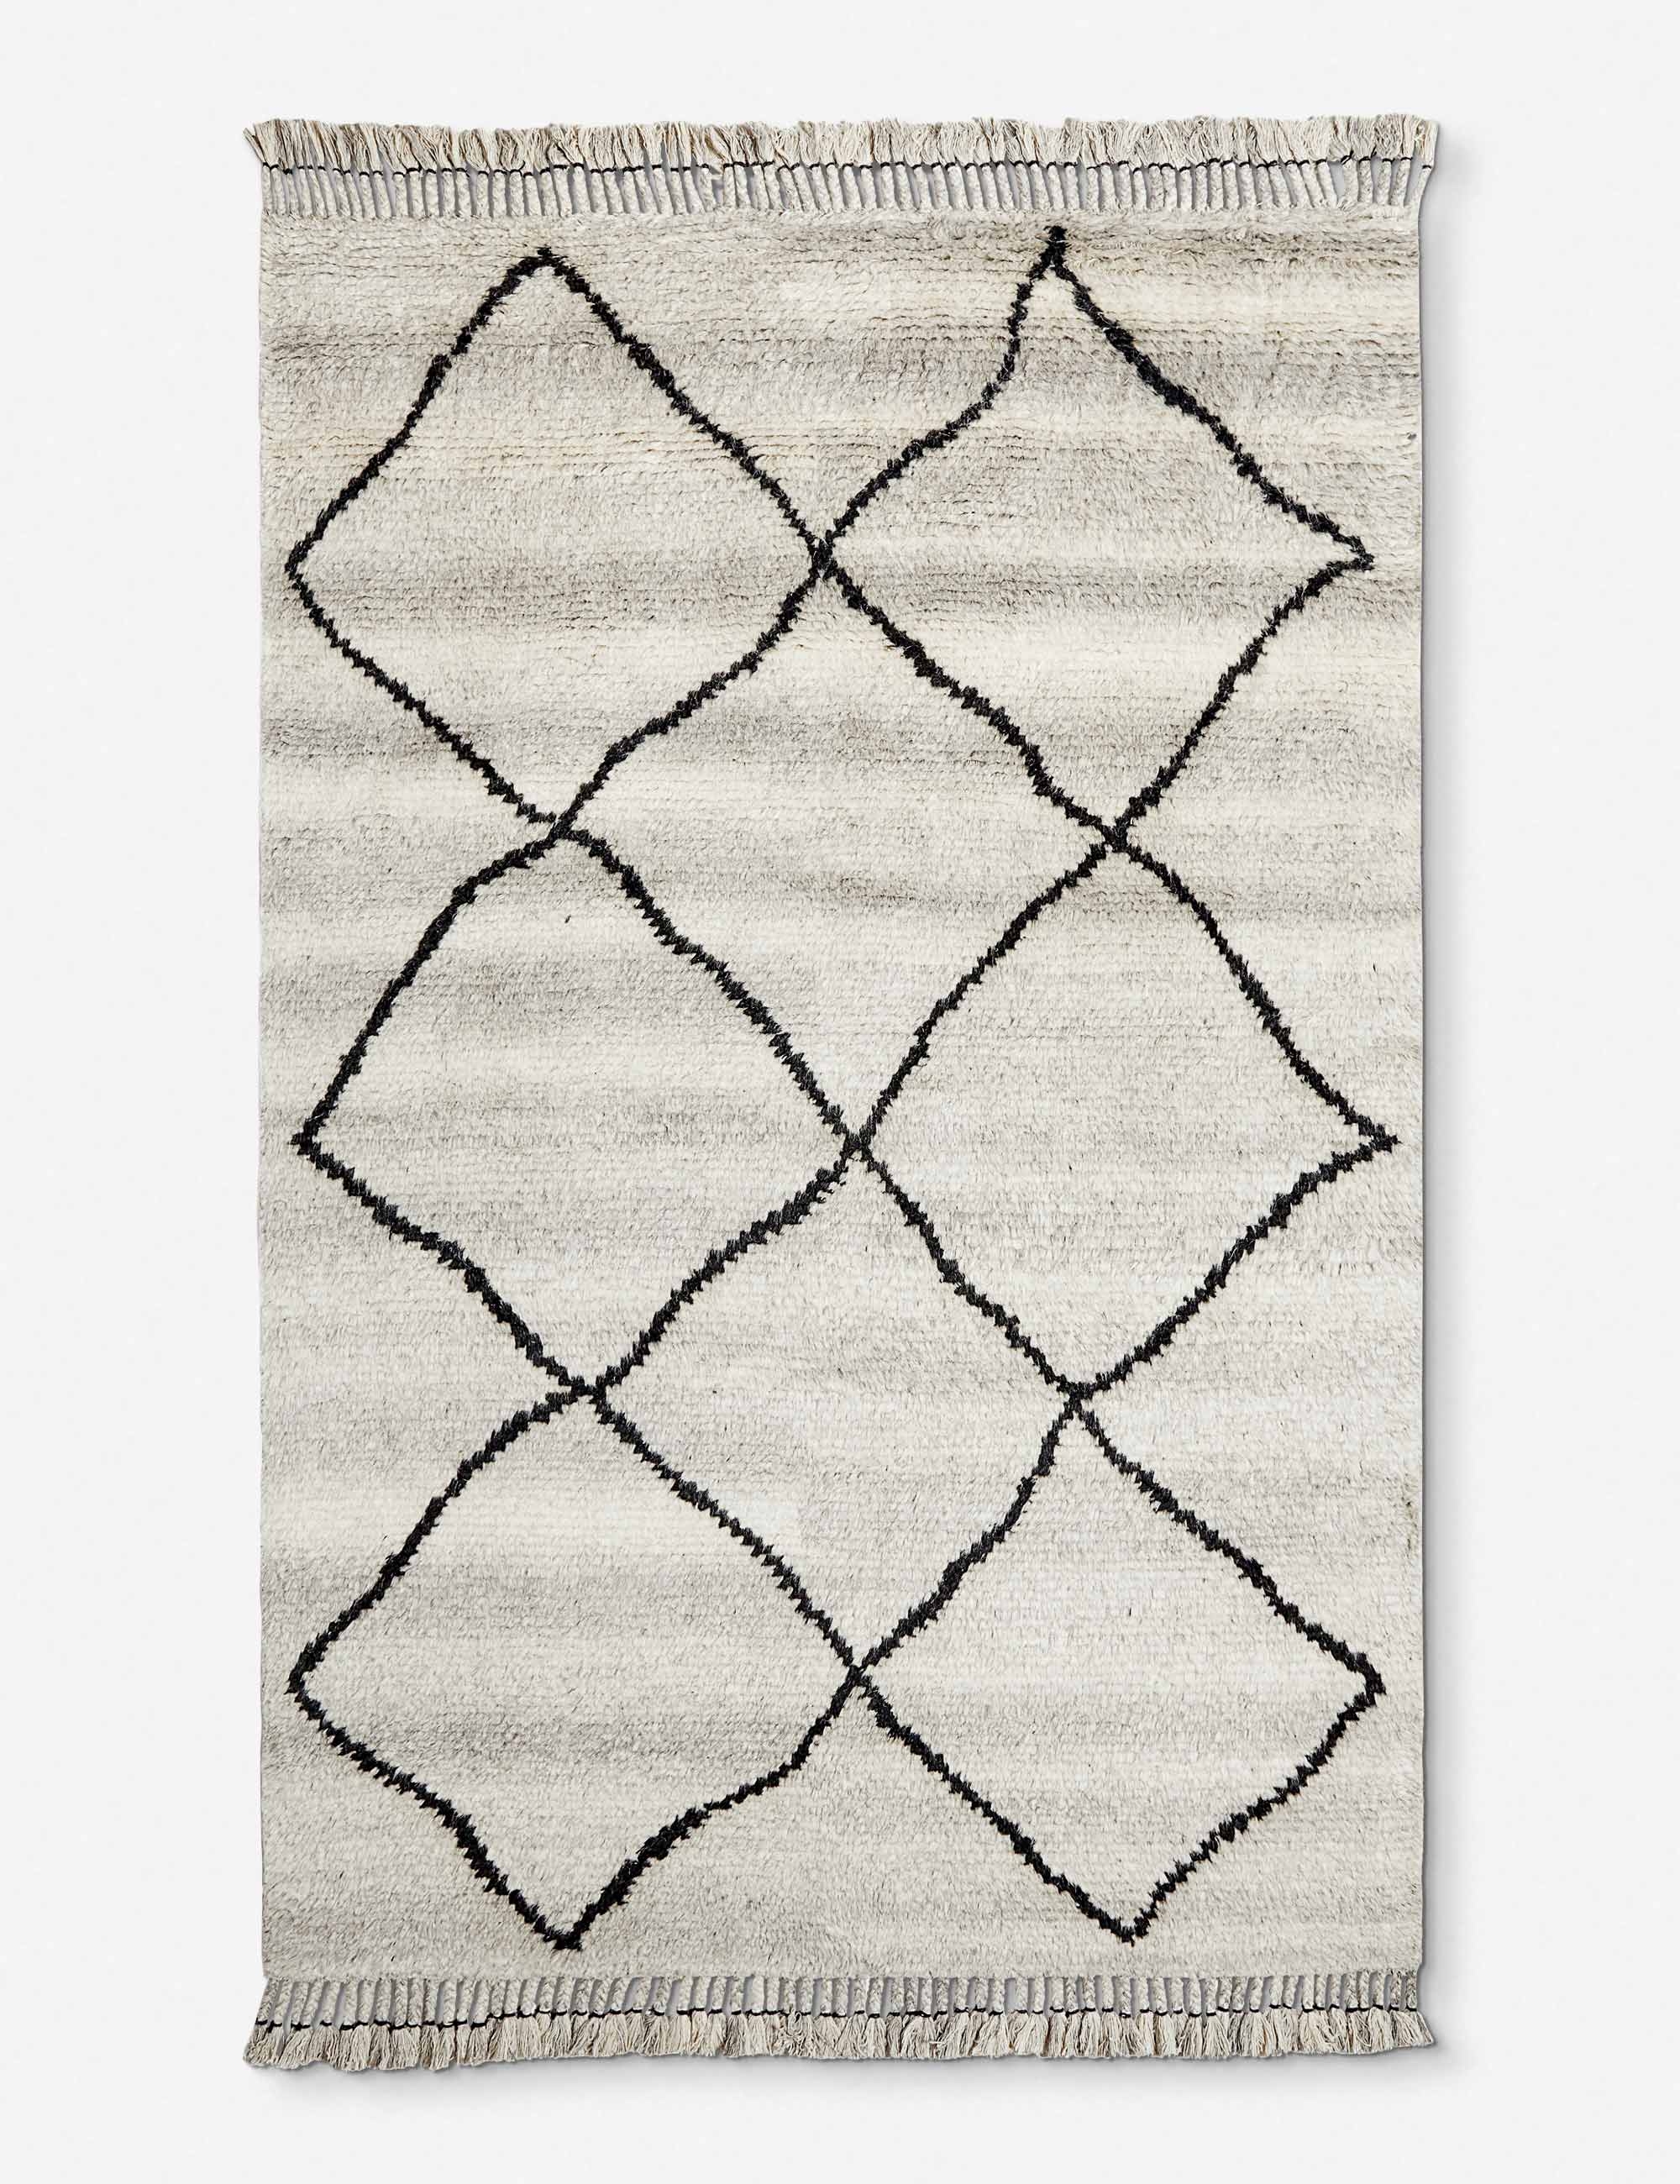 Aya Hand-Knotted Wool-Blend Moroccan Shag Rug - Image 2